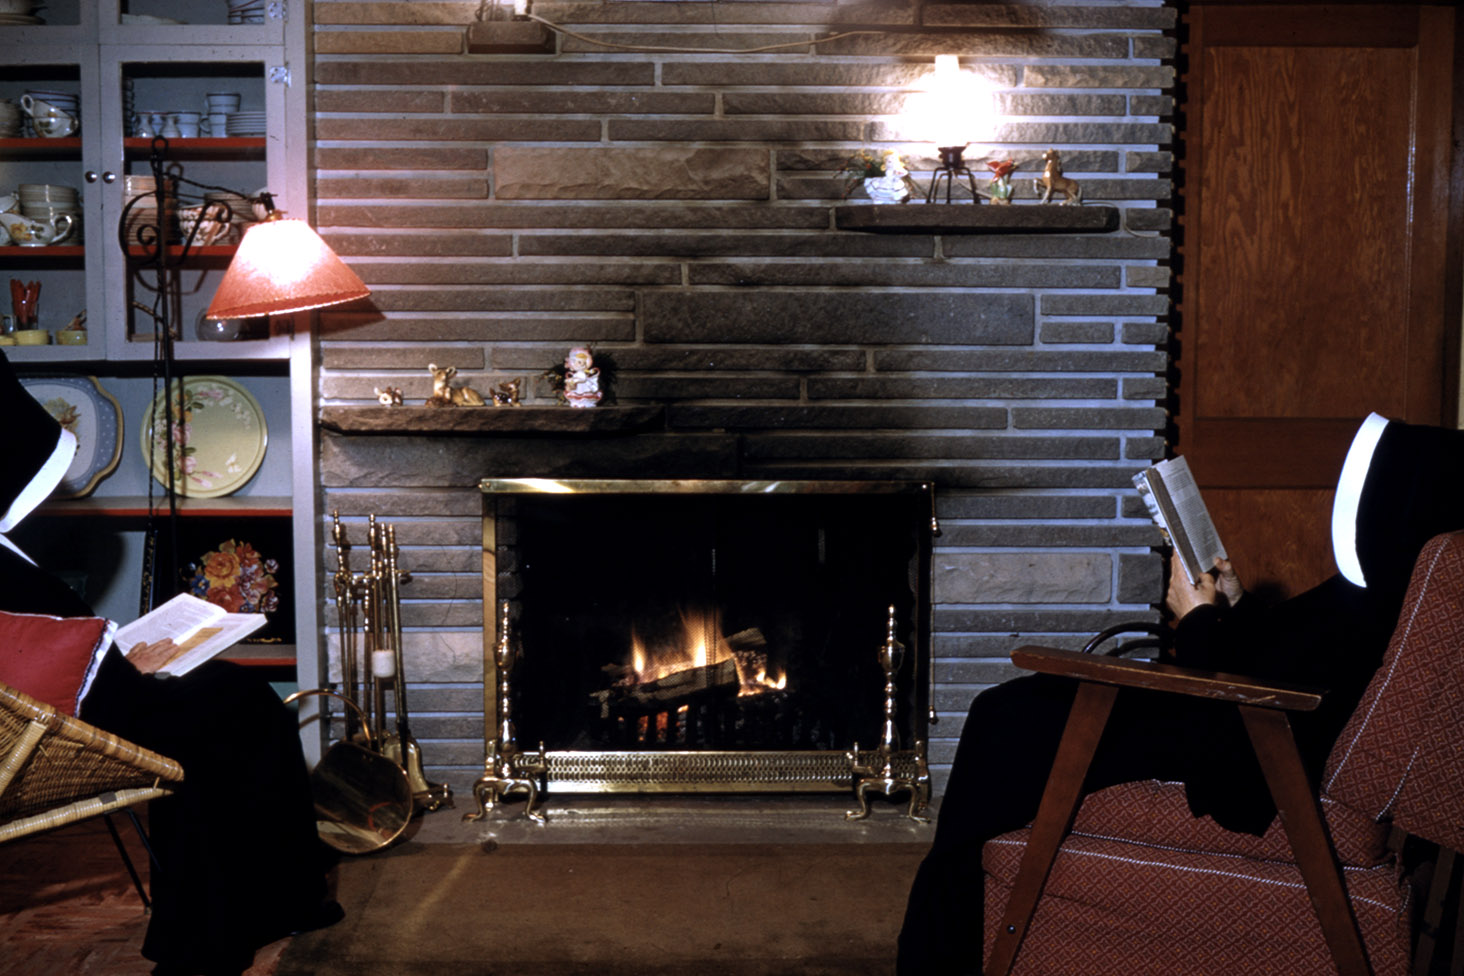 communityalbums - Sisters of Charity-Halifax reading by fire place at Chalet, Grand Lake, Nova Scotia.